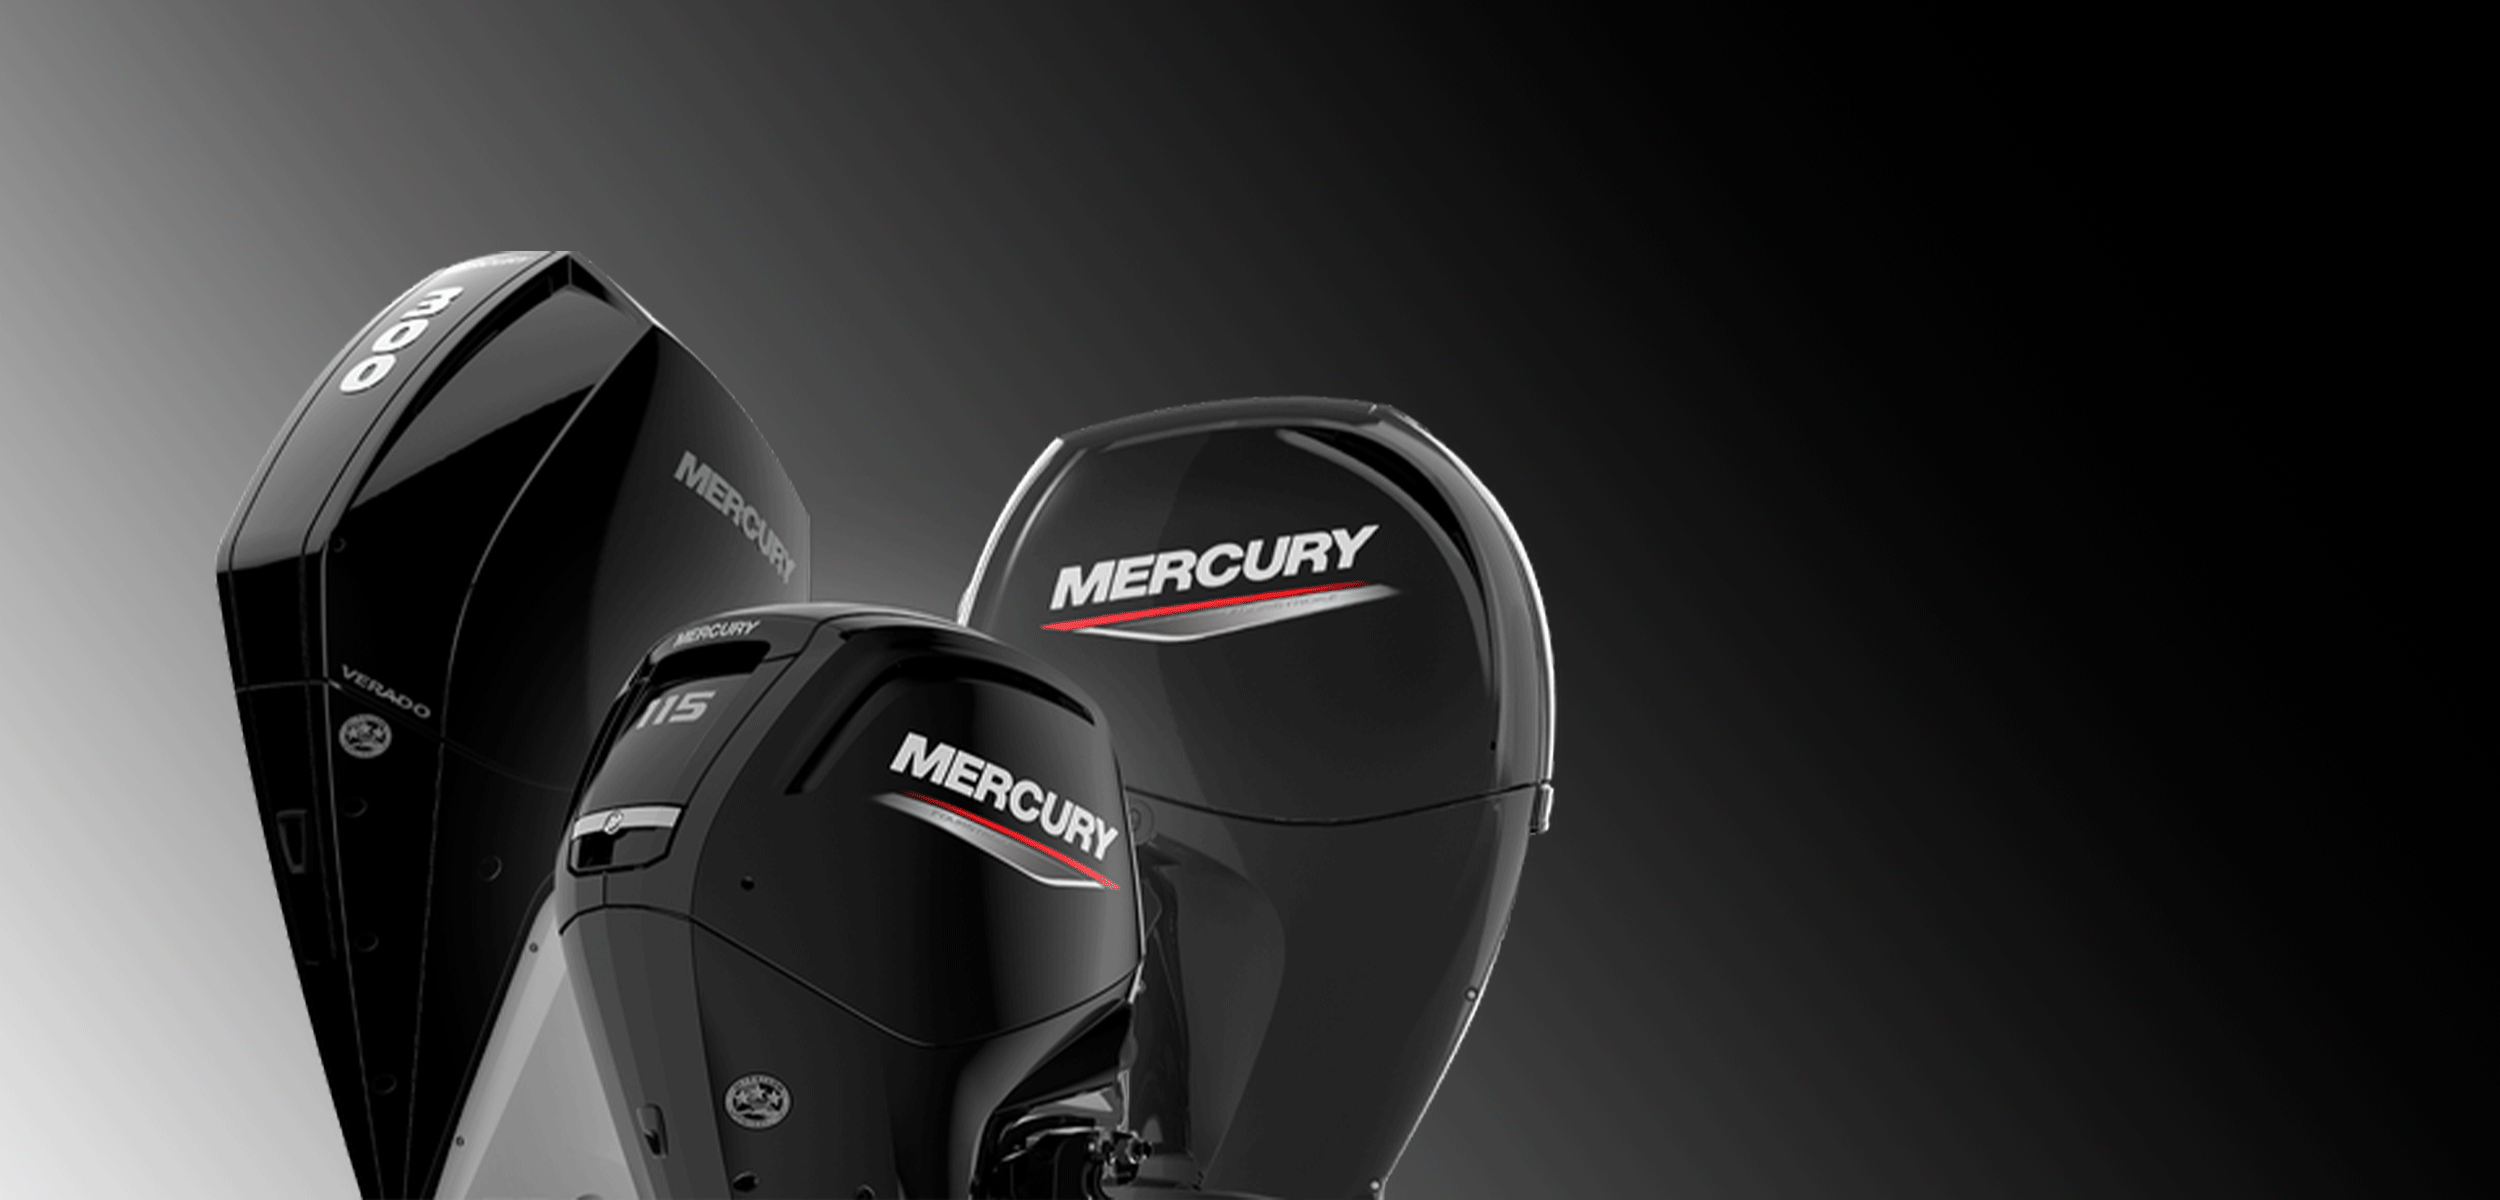 Mercury_Outboard_Excel_Leisure